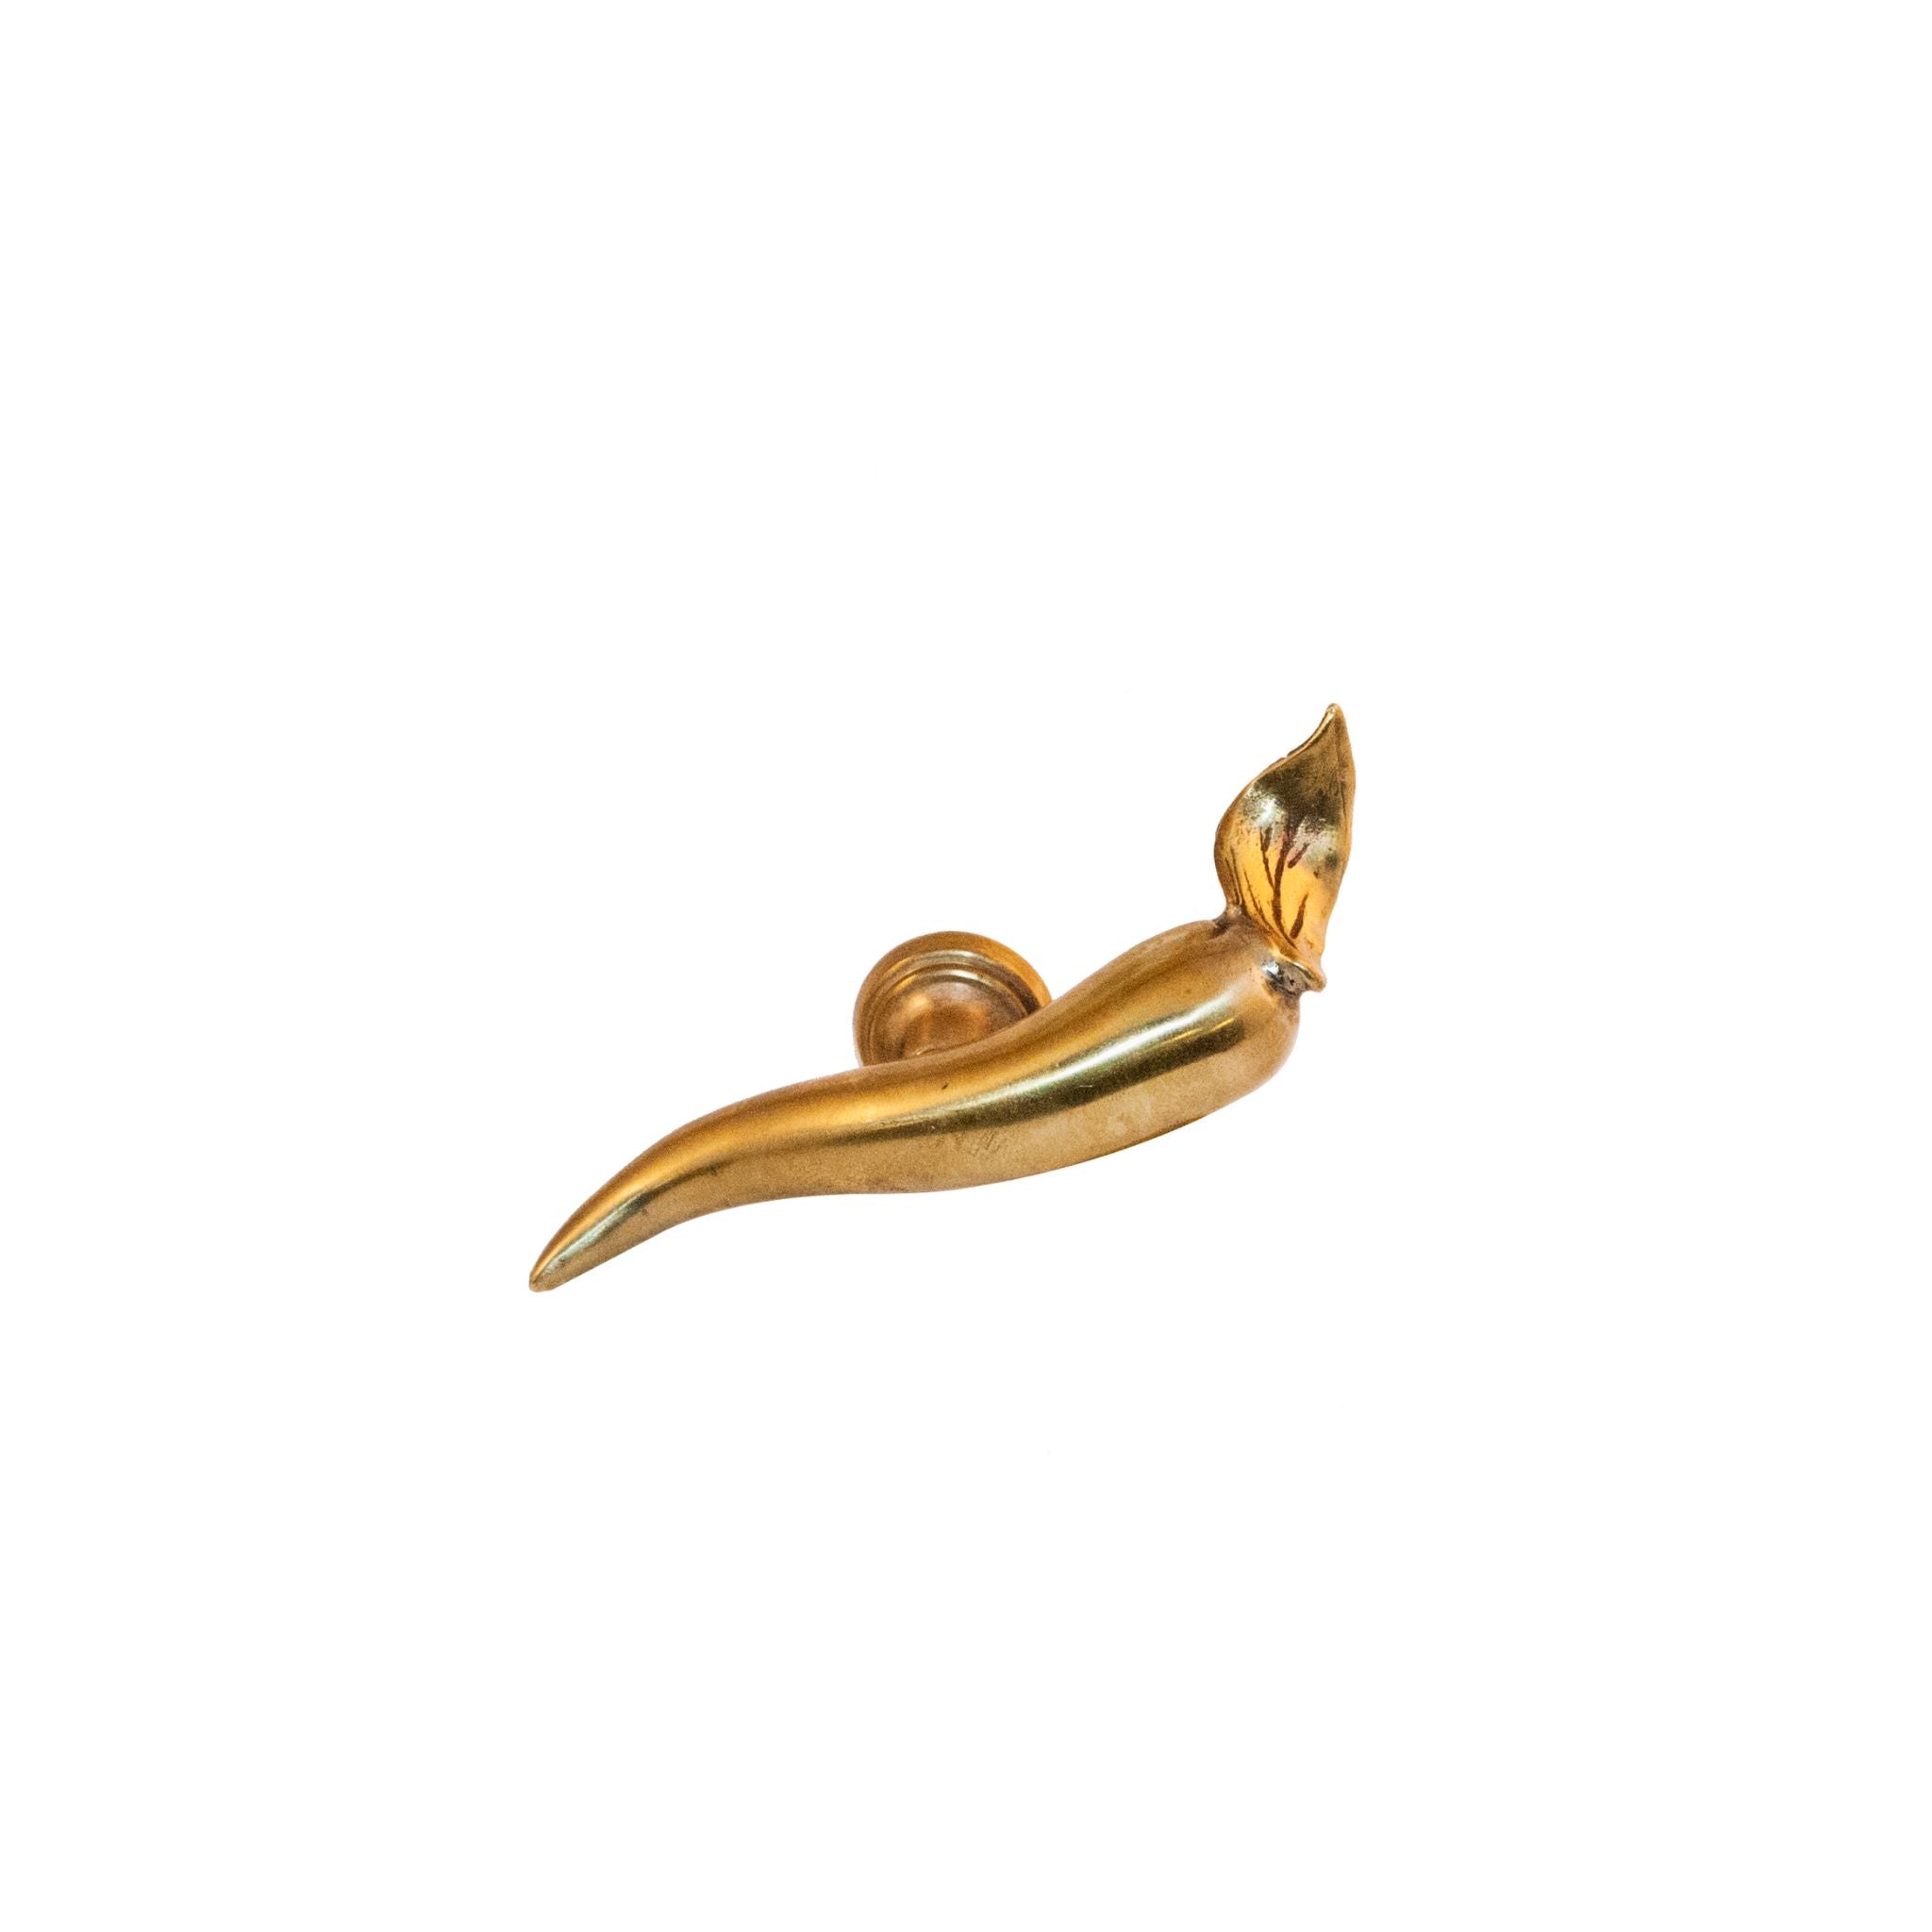 An image of a brass knob shaped like a chili pepper against a neutral background. The knob features detailed contours and texture resembling a chili pepper, adding a touch of spice and personality to furniture or drawers.